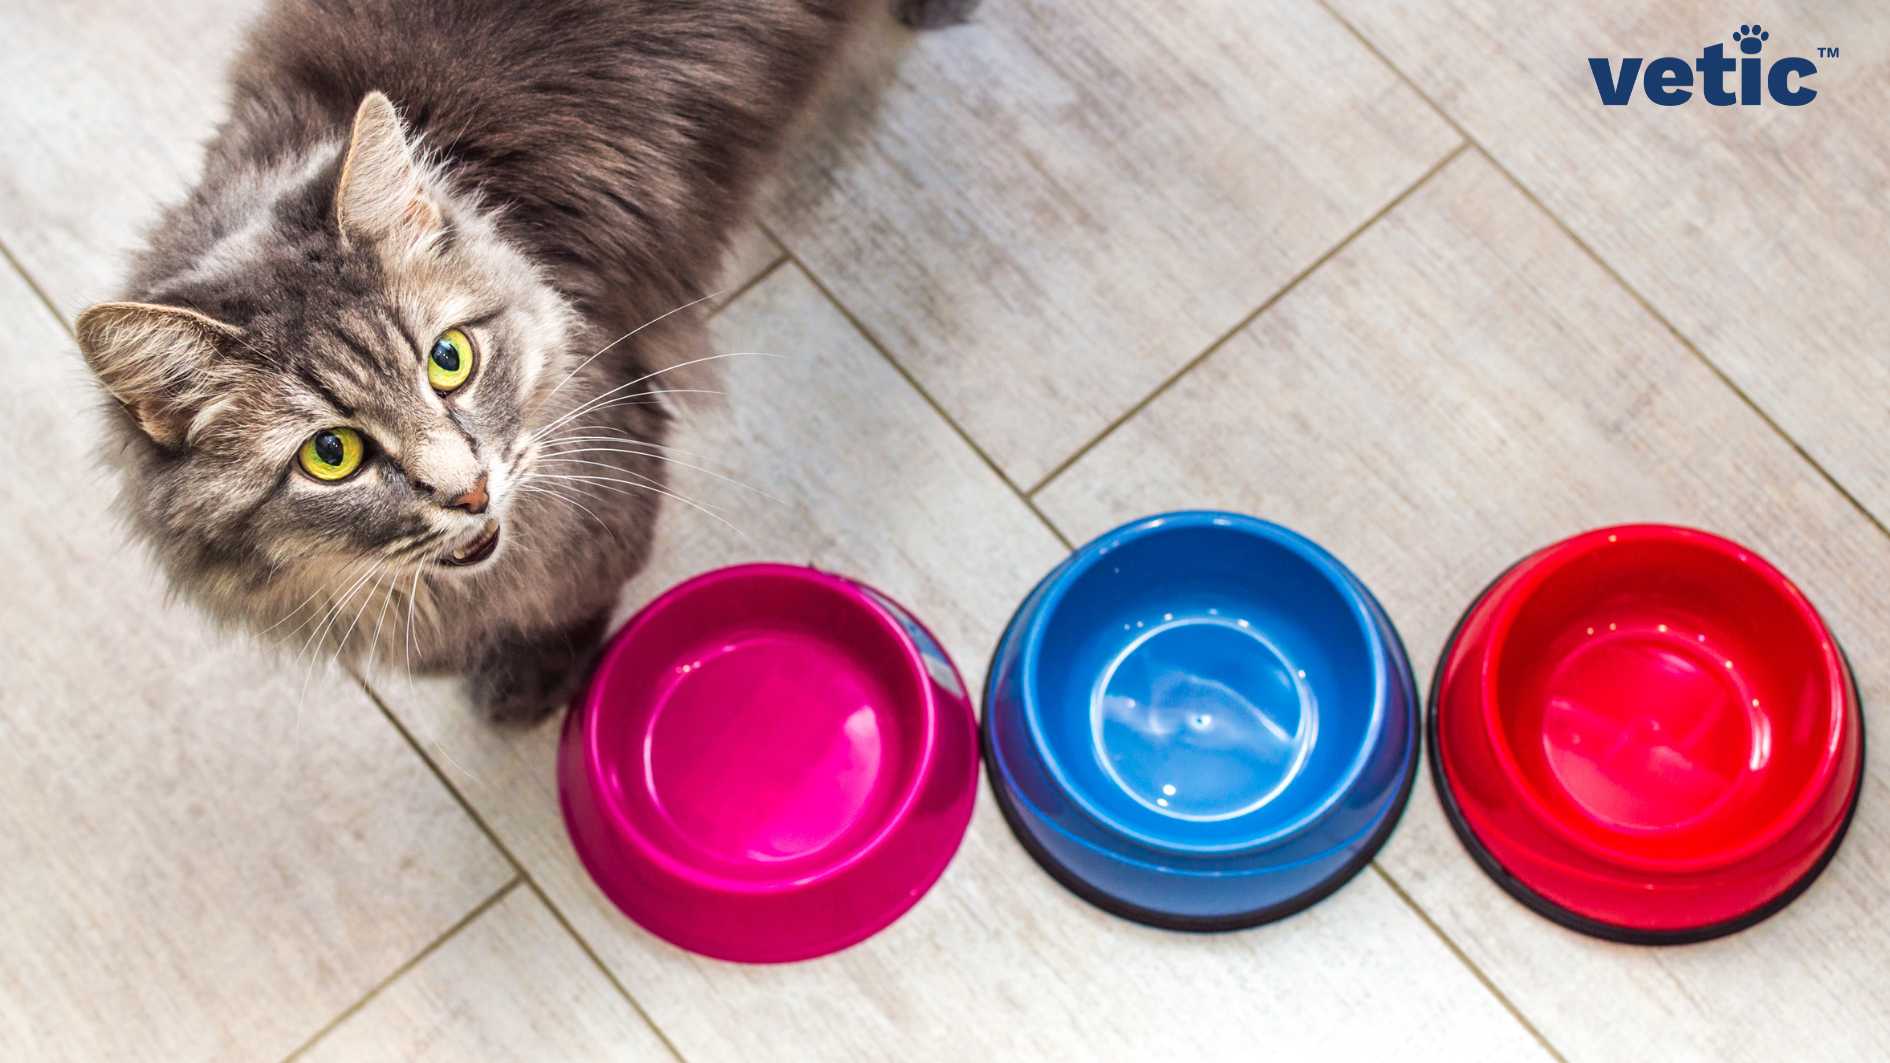 a grey-white medium-long haired cat with yellow eyes mewing at the photographer. There are three bowls (pink, blue and red) of different sizes but all are empty. Indoor-outdoor cats require multiple bowls for food and water since they are often territorial and possessive about their food.